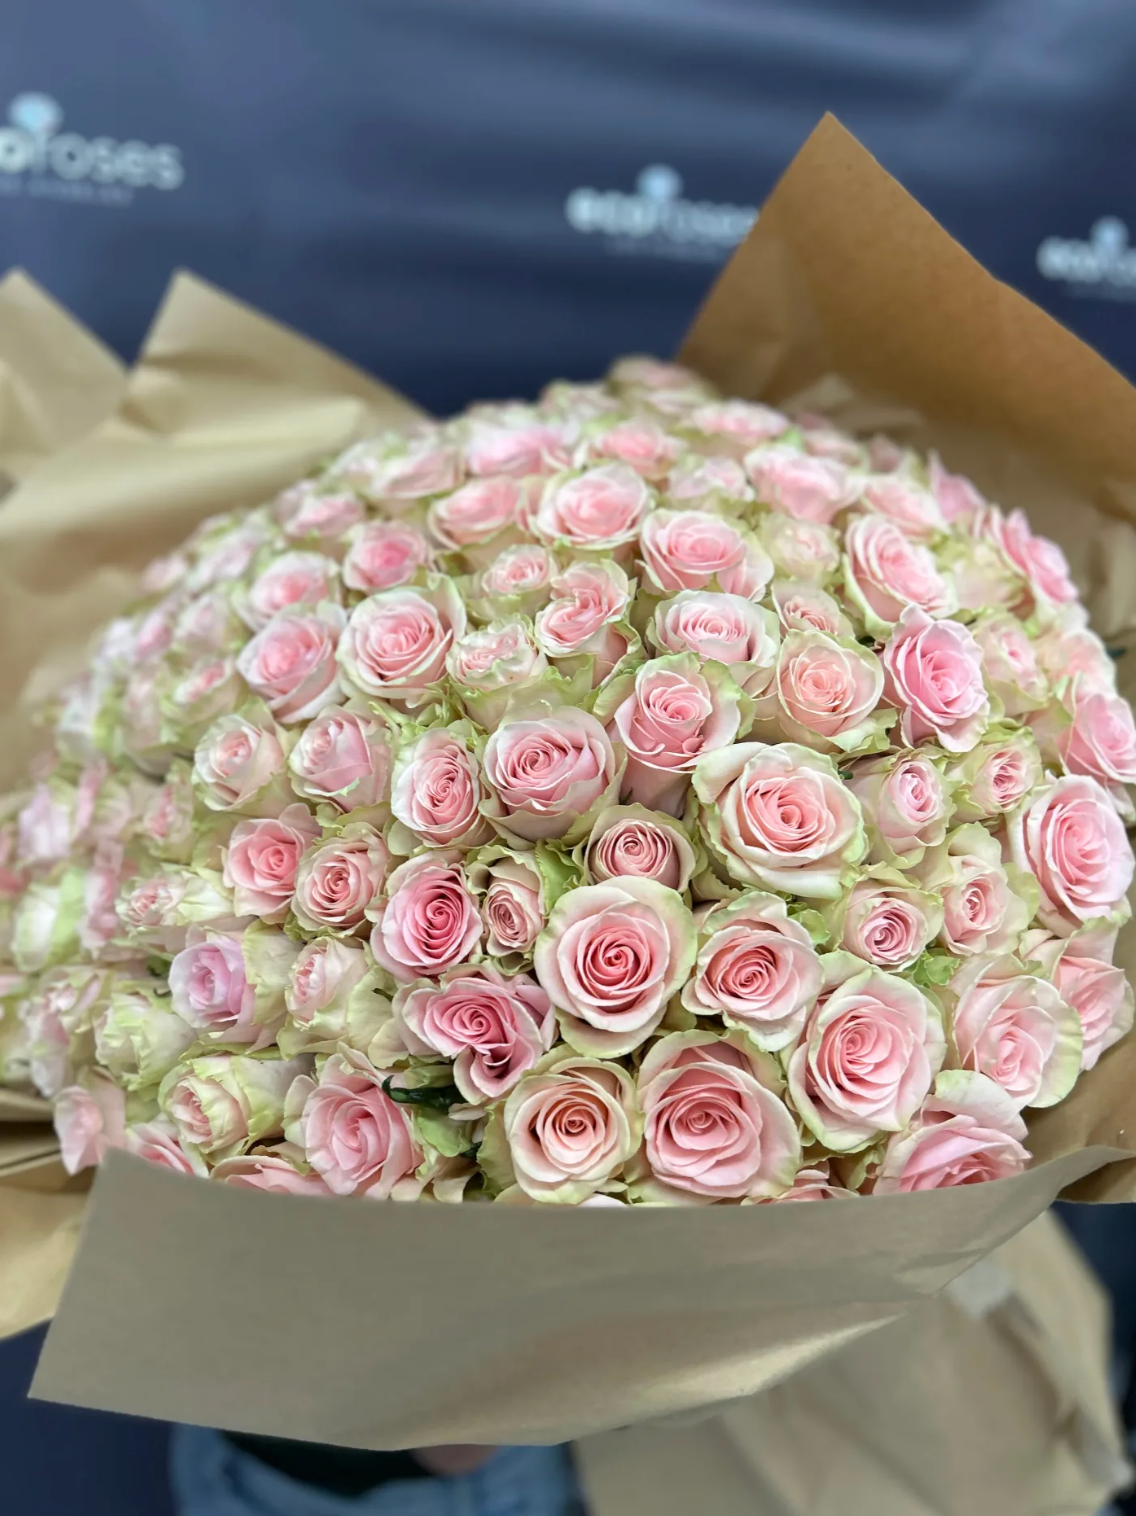 Premium Bouquet With 100 Frutetto Roses (70 cm) paper wrapped Flowers Delivery In Glendale Ca